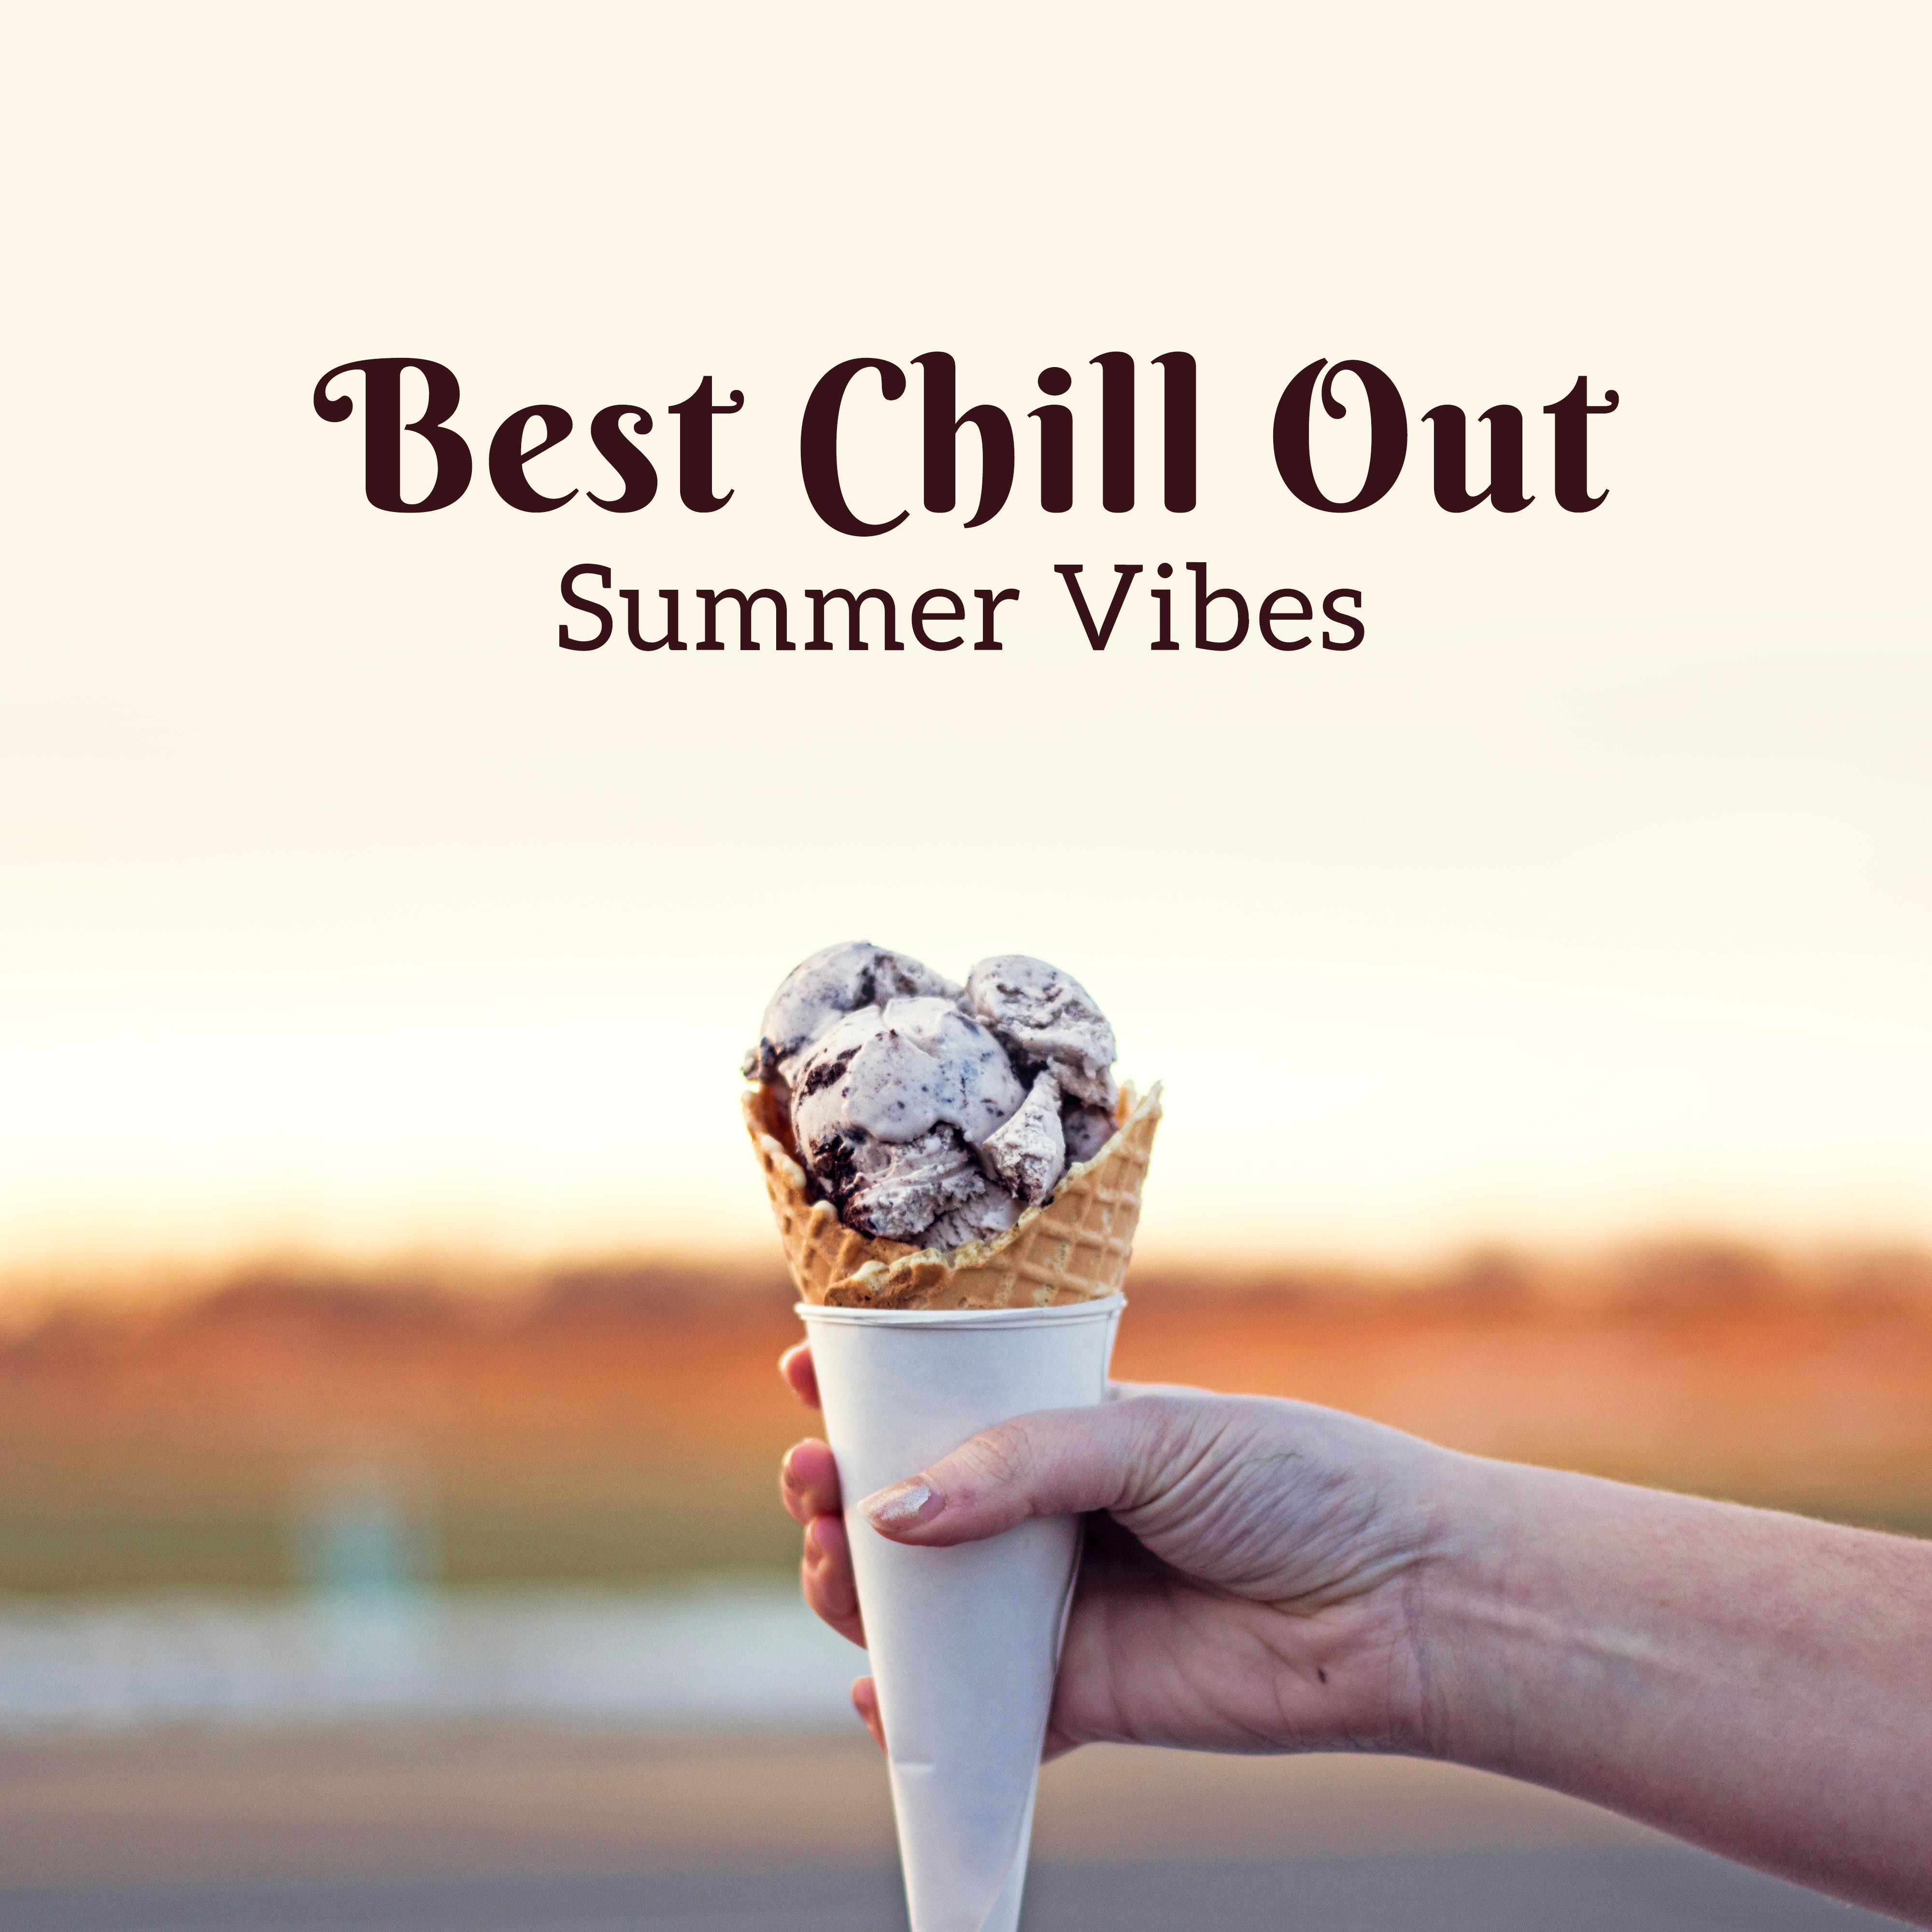 Best Chill Out Summer Vibes – Easy Listening, Peaceful Music, Stress Relief, Summer Vibes